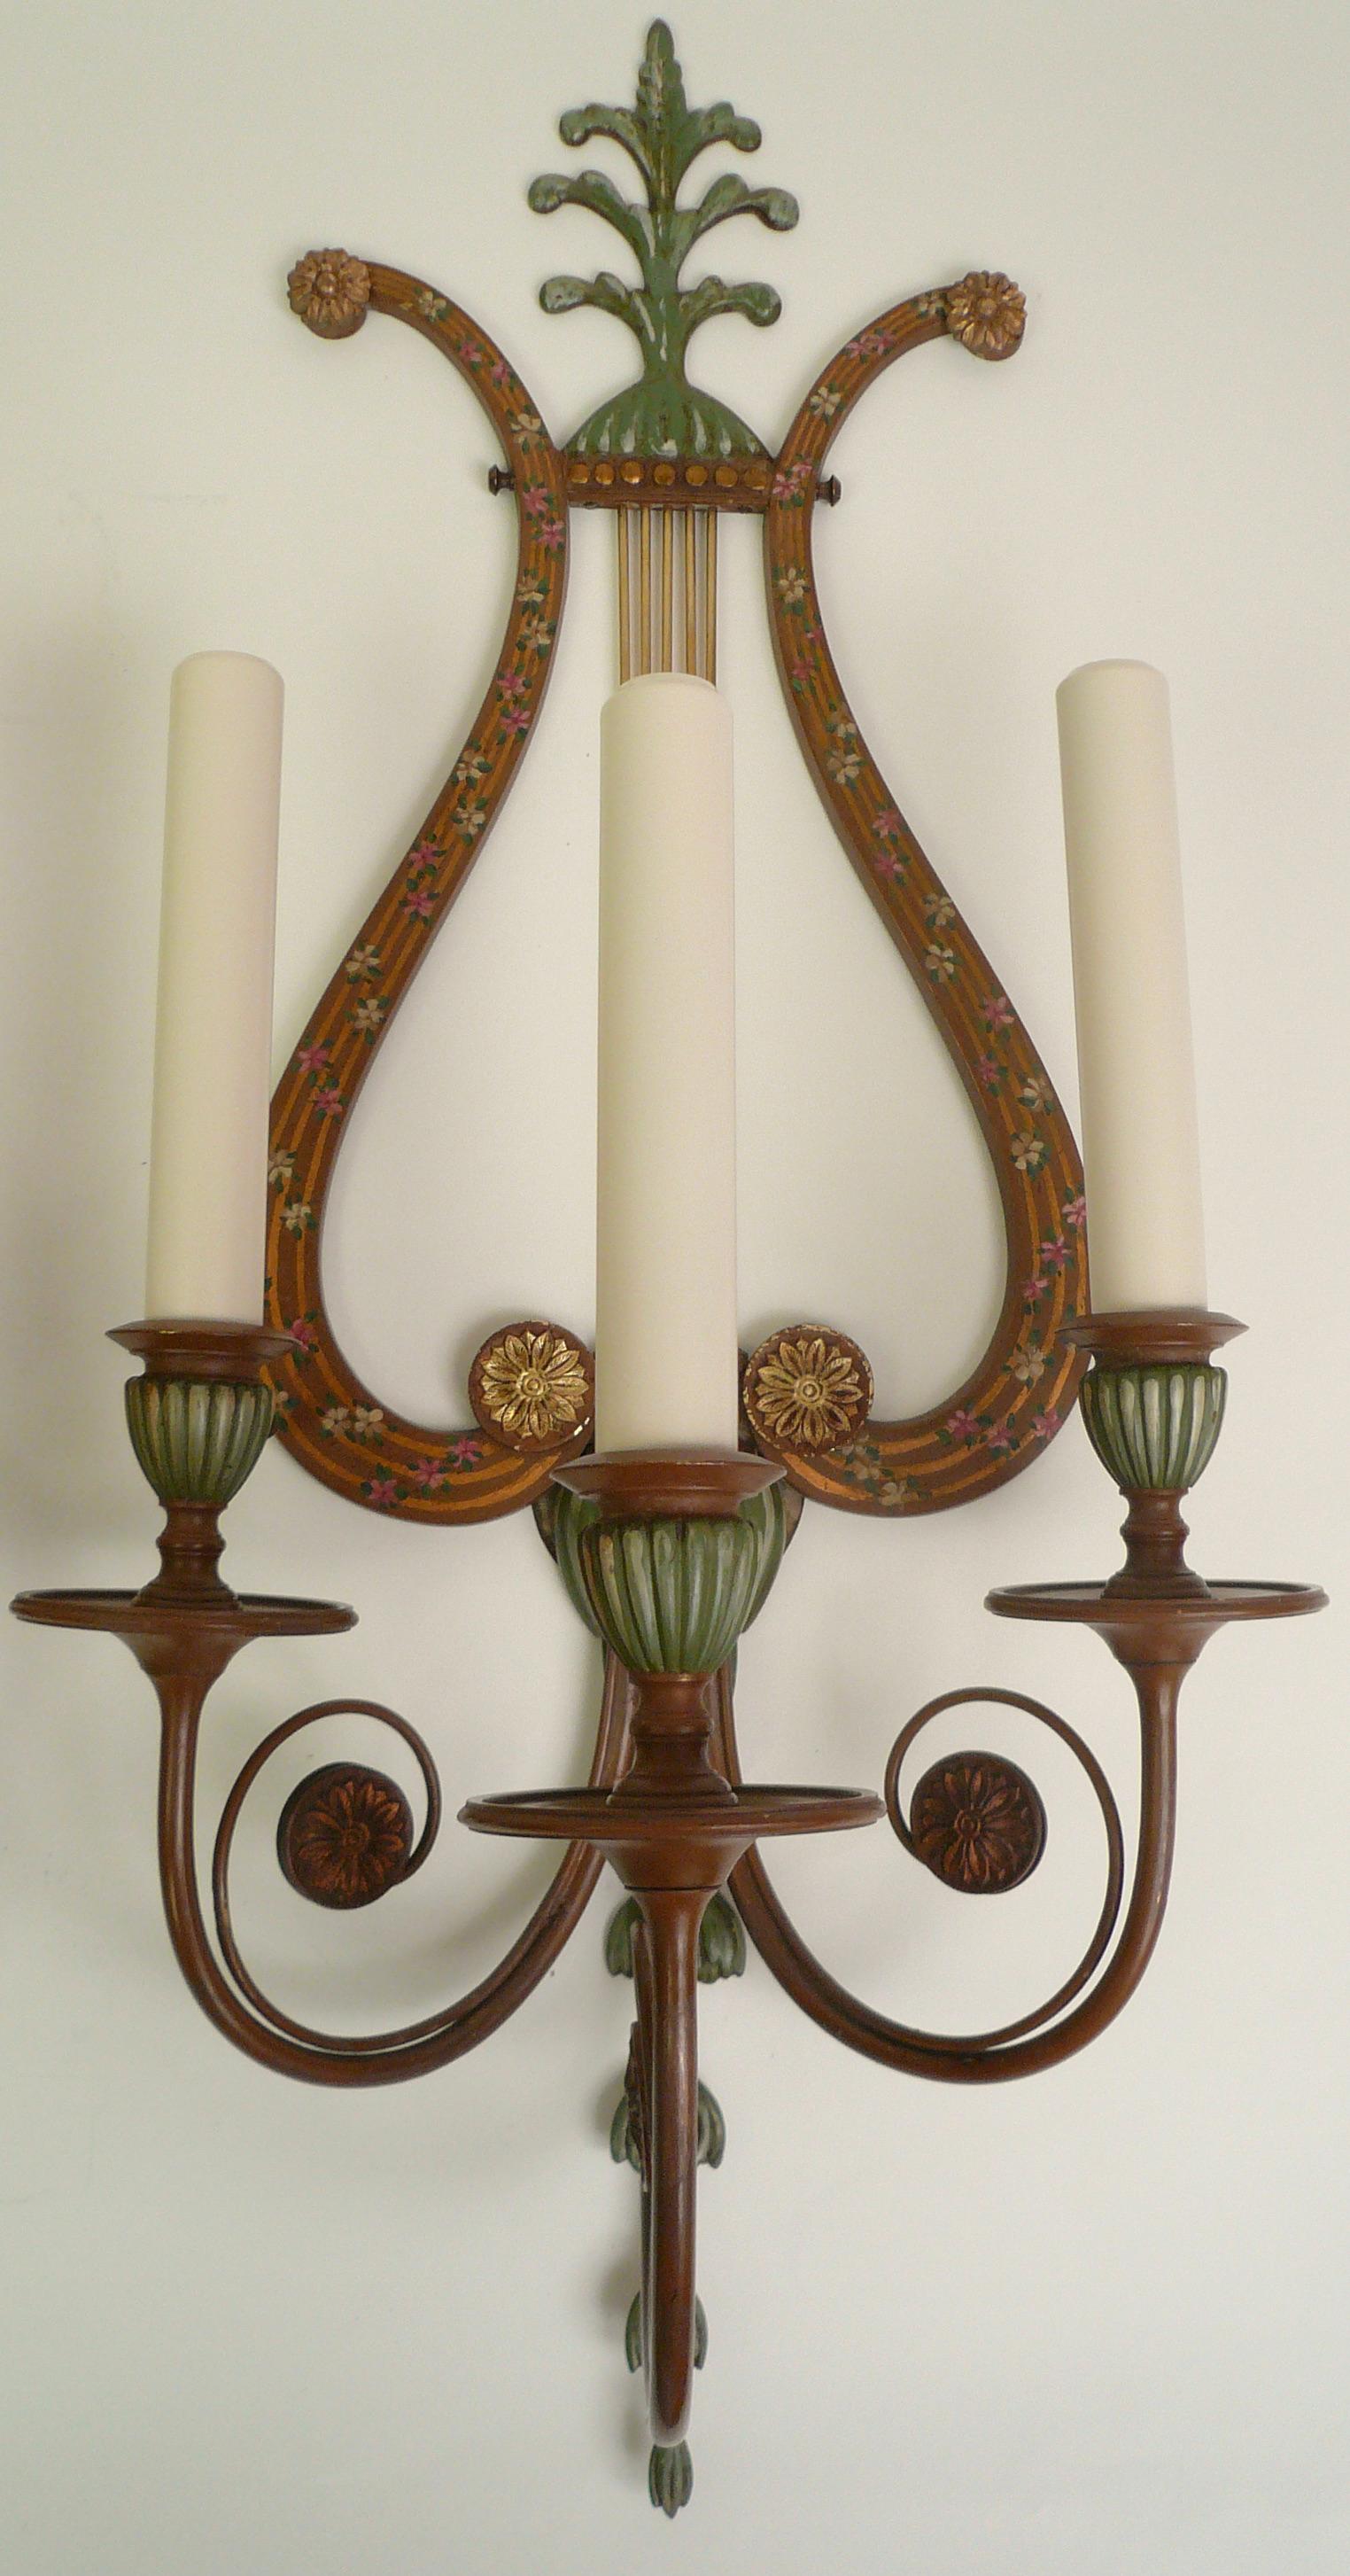 This large scale set of four Neo-Classical bronze sconces are signed by the Sterling Bronze Company New York, and retain their original hand painting.The lyre form backs are painted with garlands of pink and white roses. Other motifs include